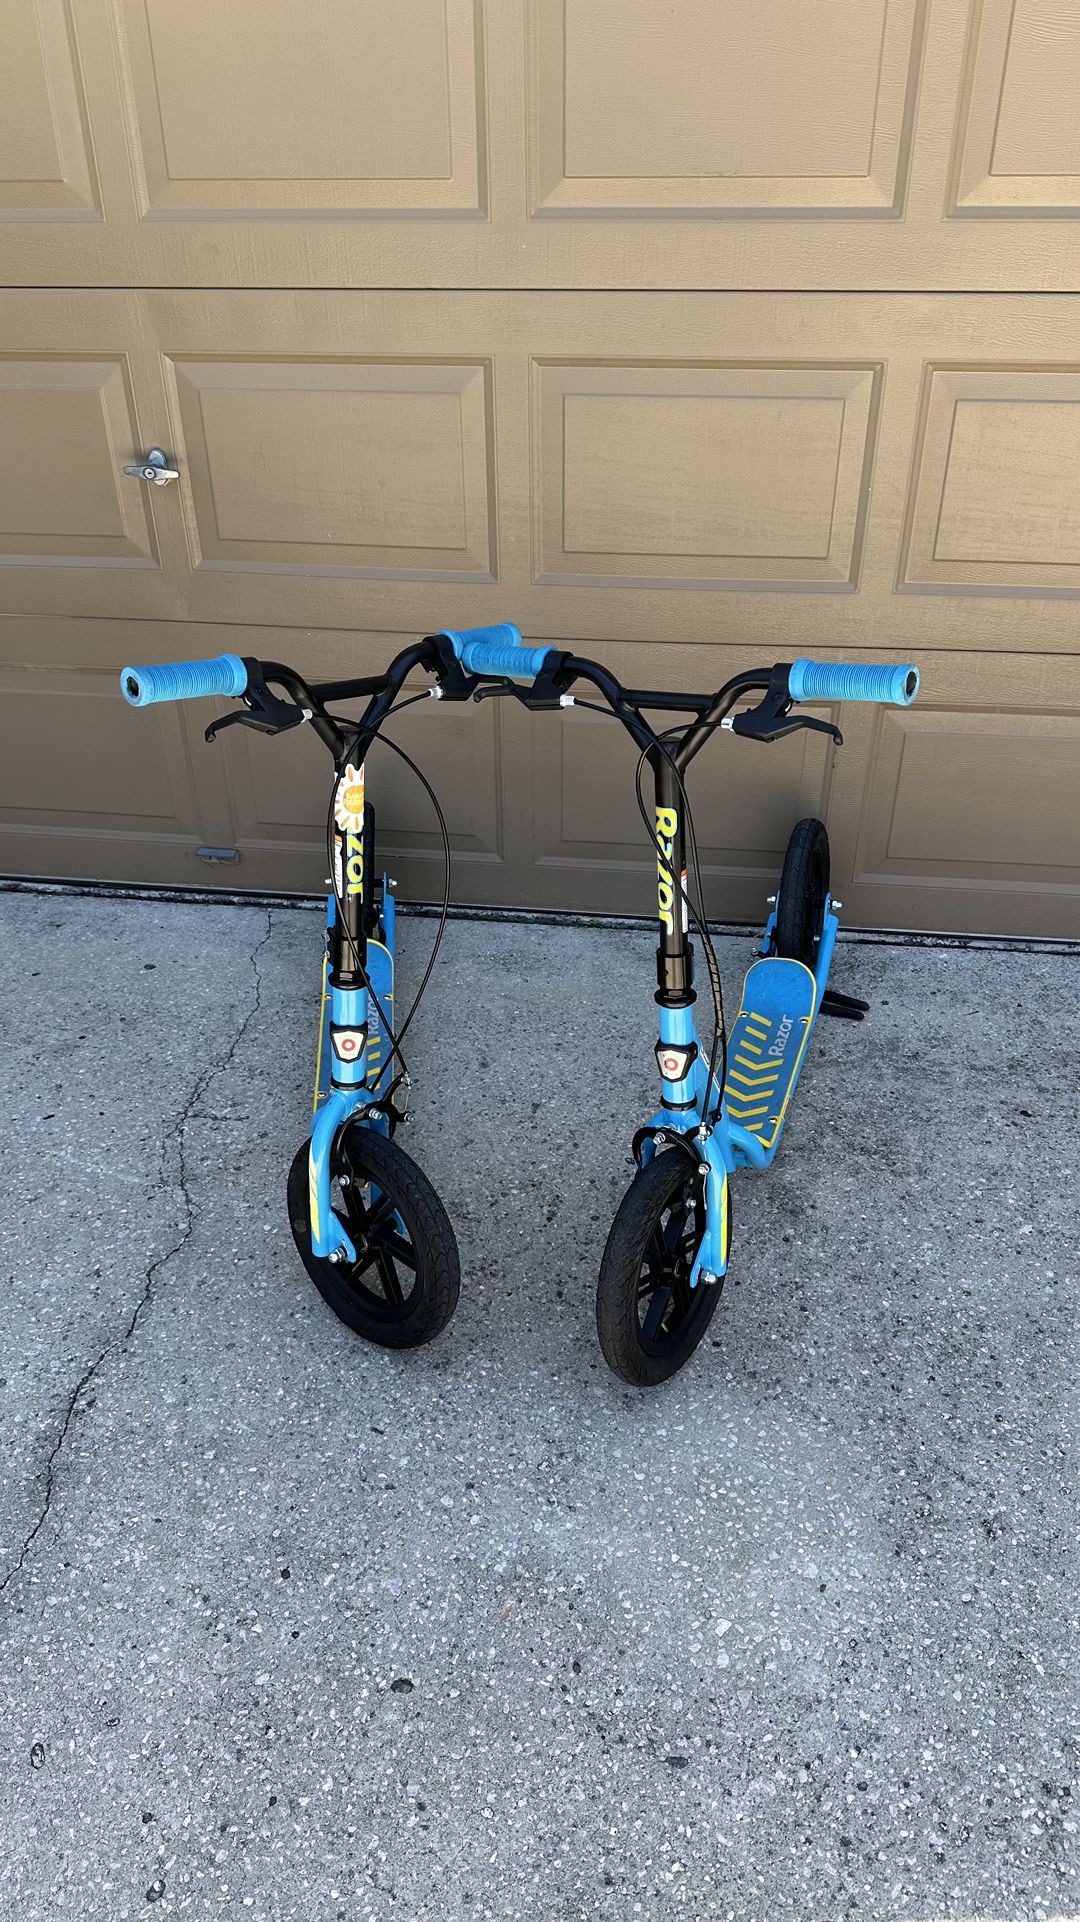 2 Razor Flashback Kick Scooter BMX Style, 12 inch Mag Wheels Air-Filled Tires, for Kids and Teens $30 each $60 total